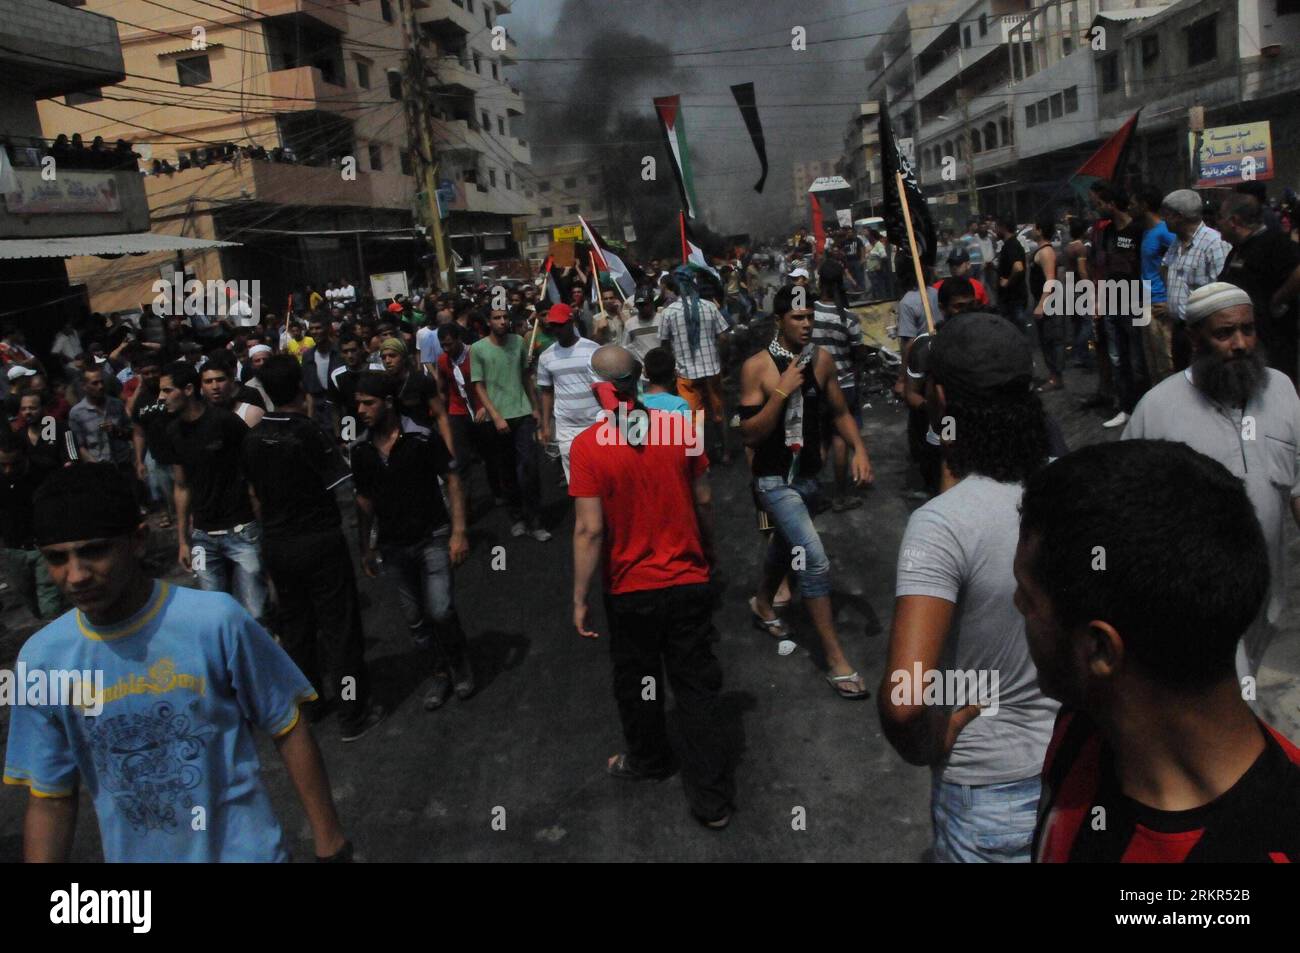 Bildnummer: 58117819  Datum: 18.06.2012  Copyright: imago/Xinhua (120618) -- BEIRUT, June 18, 2012 (Xinhua) -- Palestinians clash with Lebanese army during a funeral procession for 15-year-old Palestinian Ahmad Qassem, who was killed last Friday in the refugee camp of Nahr el-Bared, Lebanon, June 18, 2012. The Lebanese army shot dead at least one Palestinian during clashes Monday in the refugee camp in northern Lebanon, Lebanese security sources said. Three Lebanese army soldiers and 10 Palestinians were injured in the clashes. (Xinhua/Ali) LEBANON-PALESTINIAN-UNREST-CLASH PUBLICATIONxNOTxINxC Stock Photo